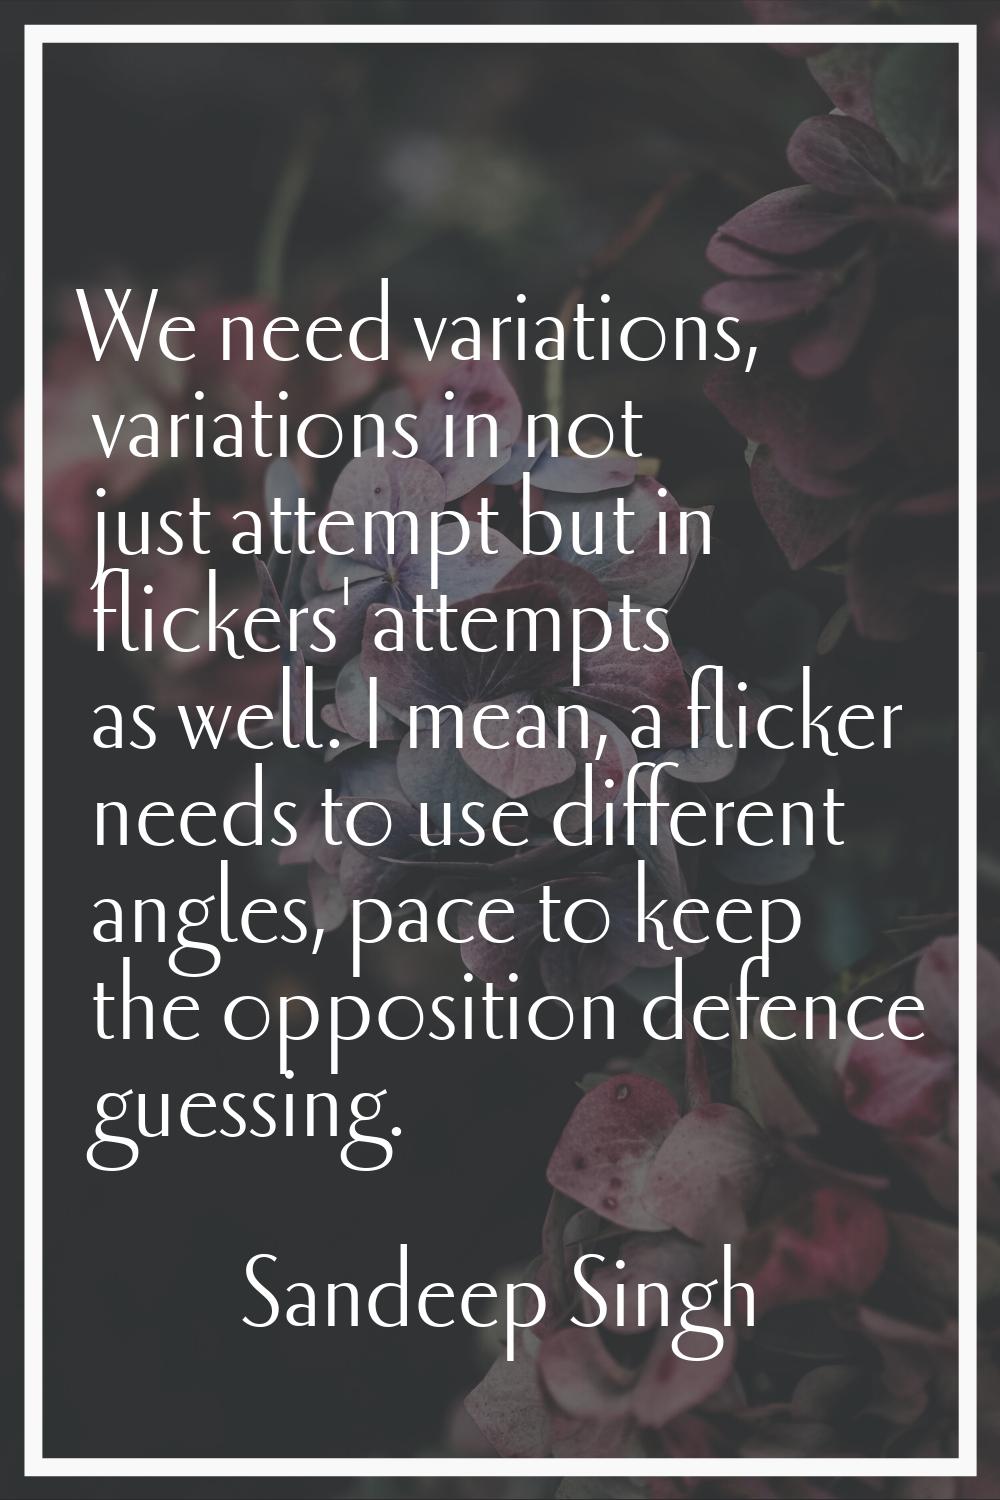 We need variations, variations in not just attempt but in flickers' attempts as well. I mean, a fli